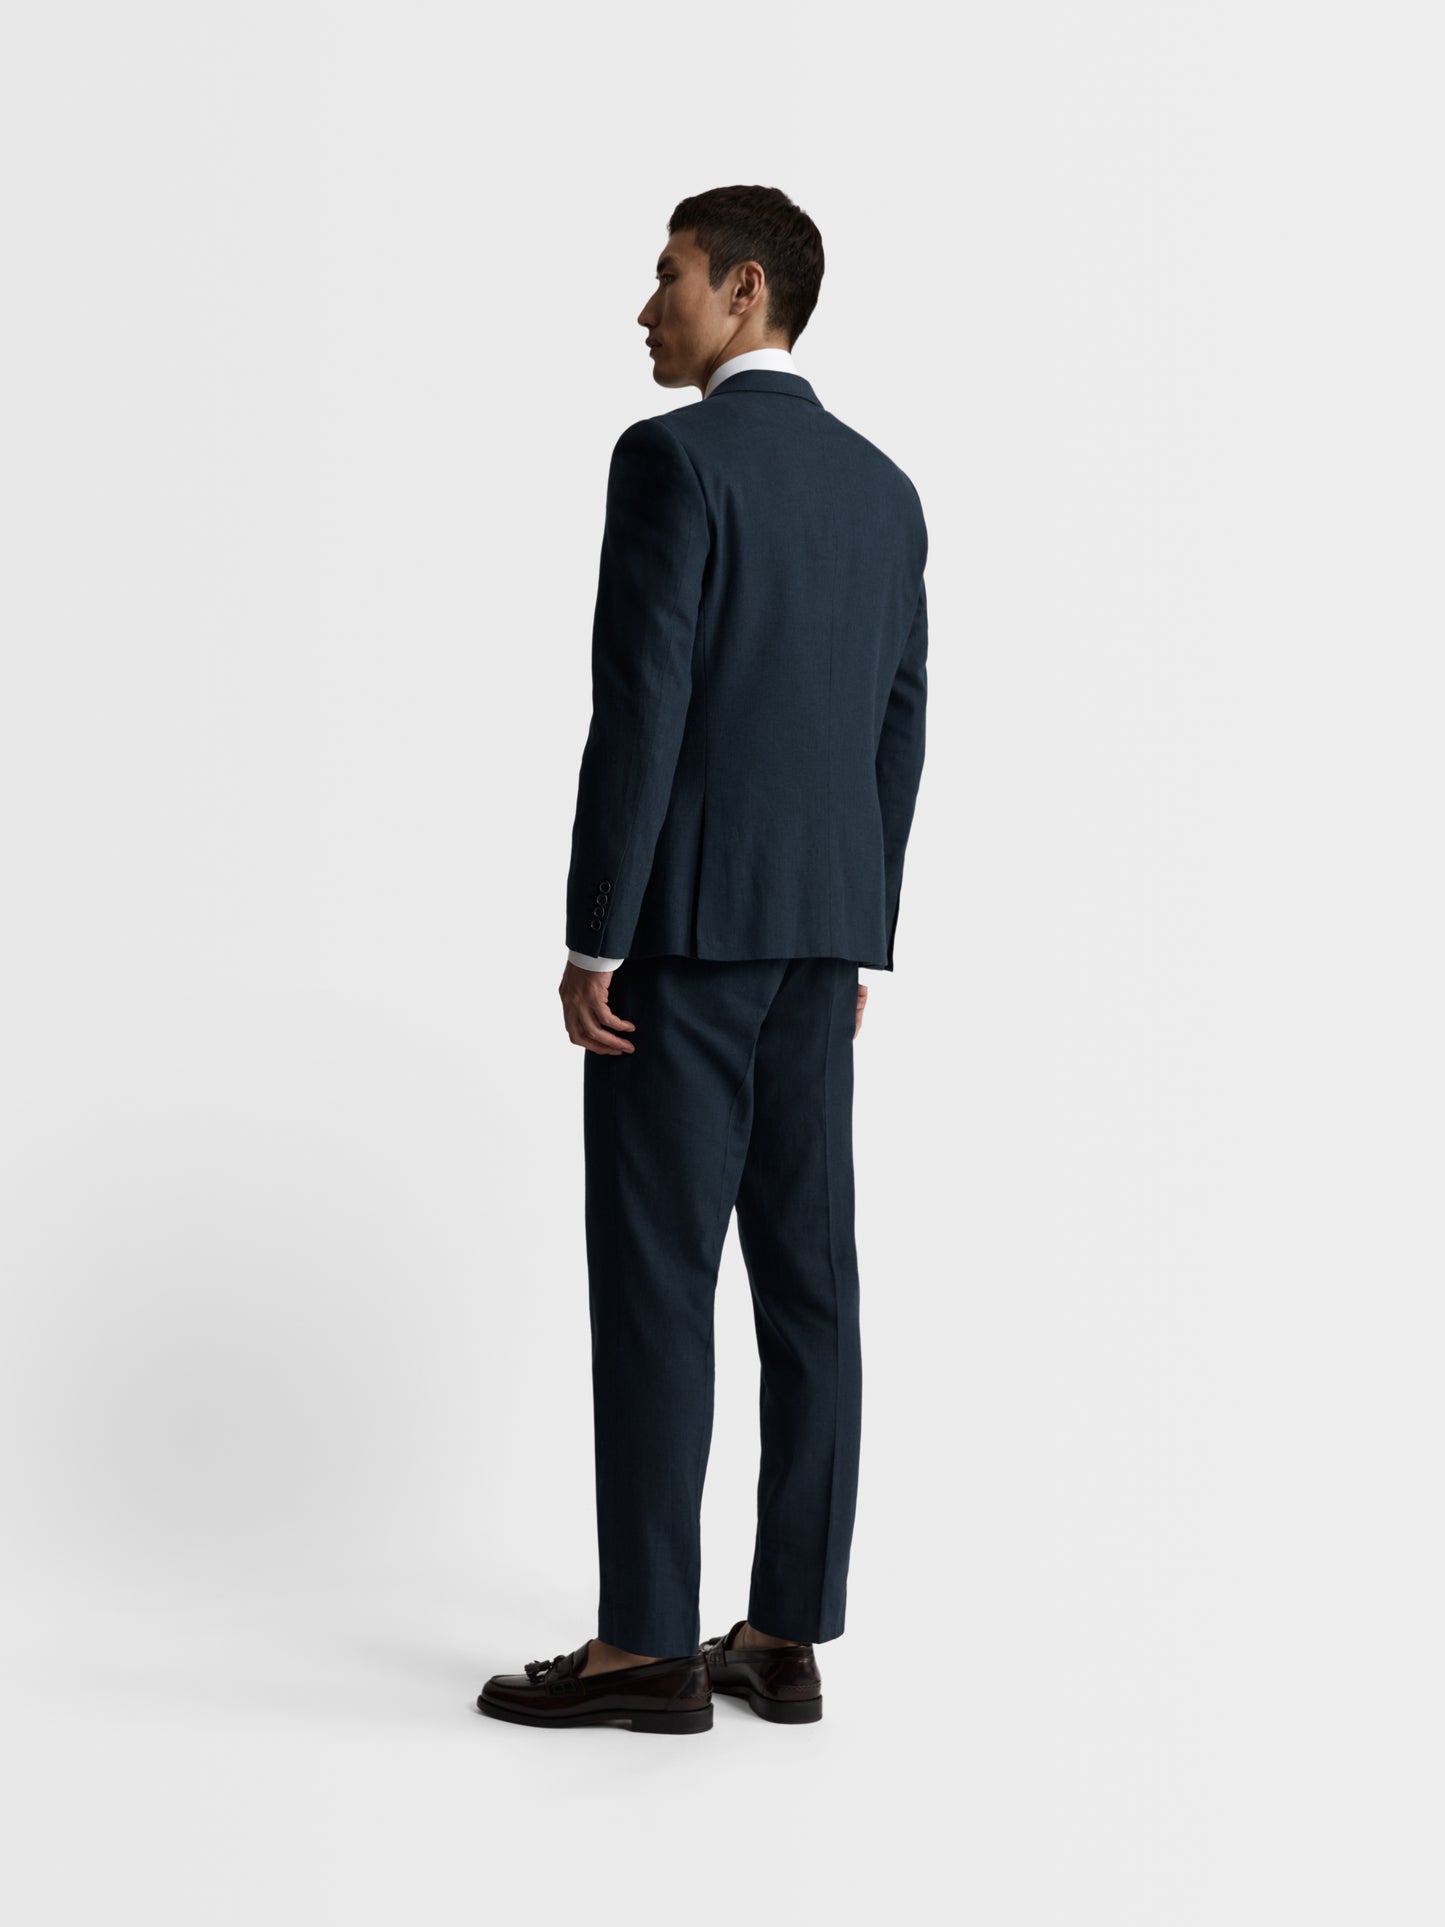 Image 5 of Slim Fit Double Breasted Linen Suit Jacket in Navy